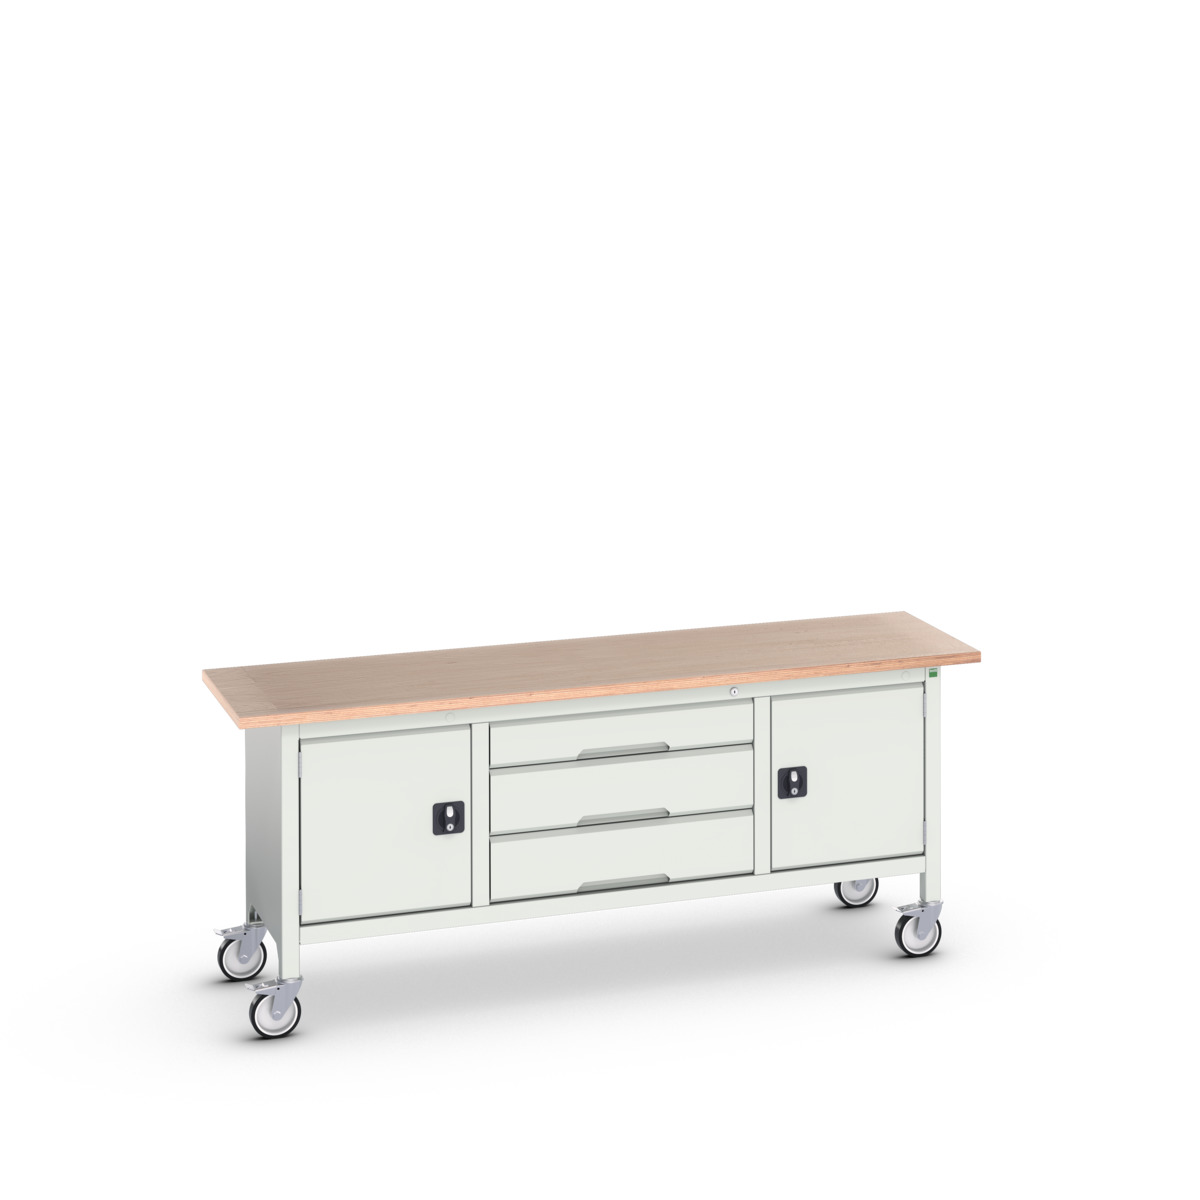 16923232.16 - verso mobile storage bench (mpx)